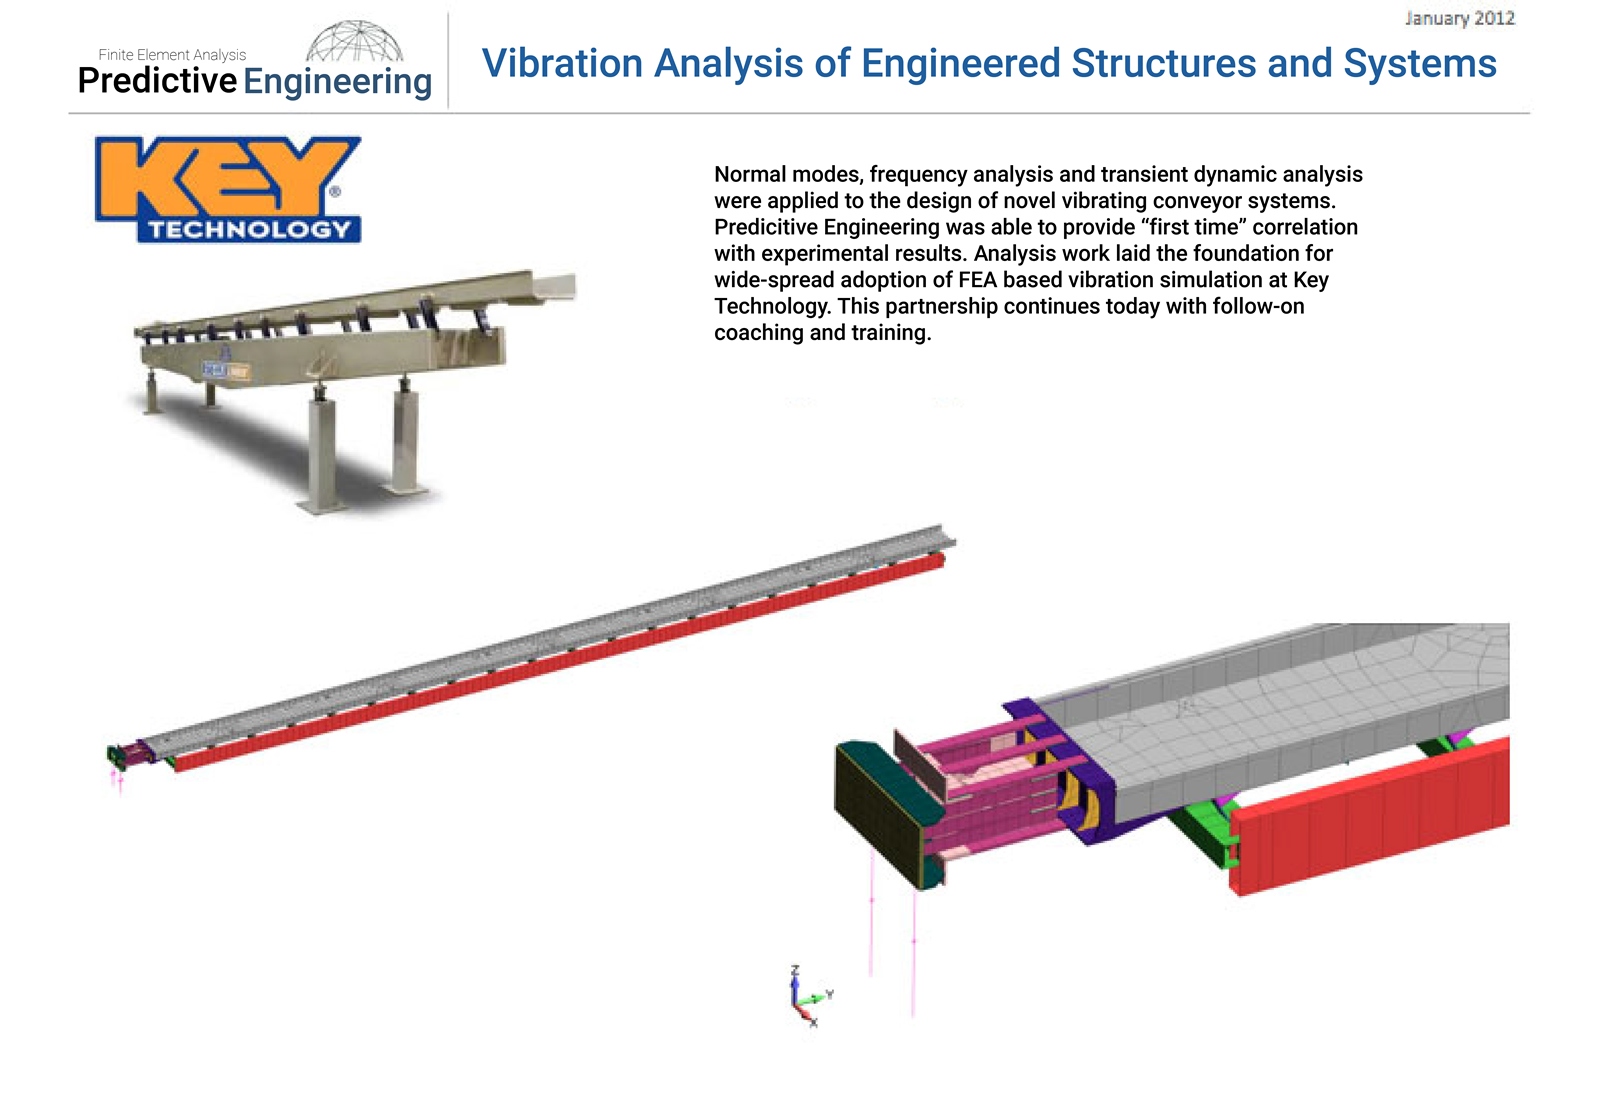 Normal modes, frequency analysis and transient dynamic analysis were applied to the design of novel vibrating conveyor systems.